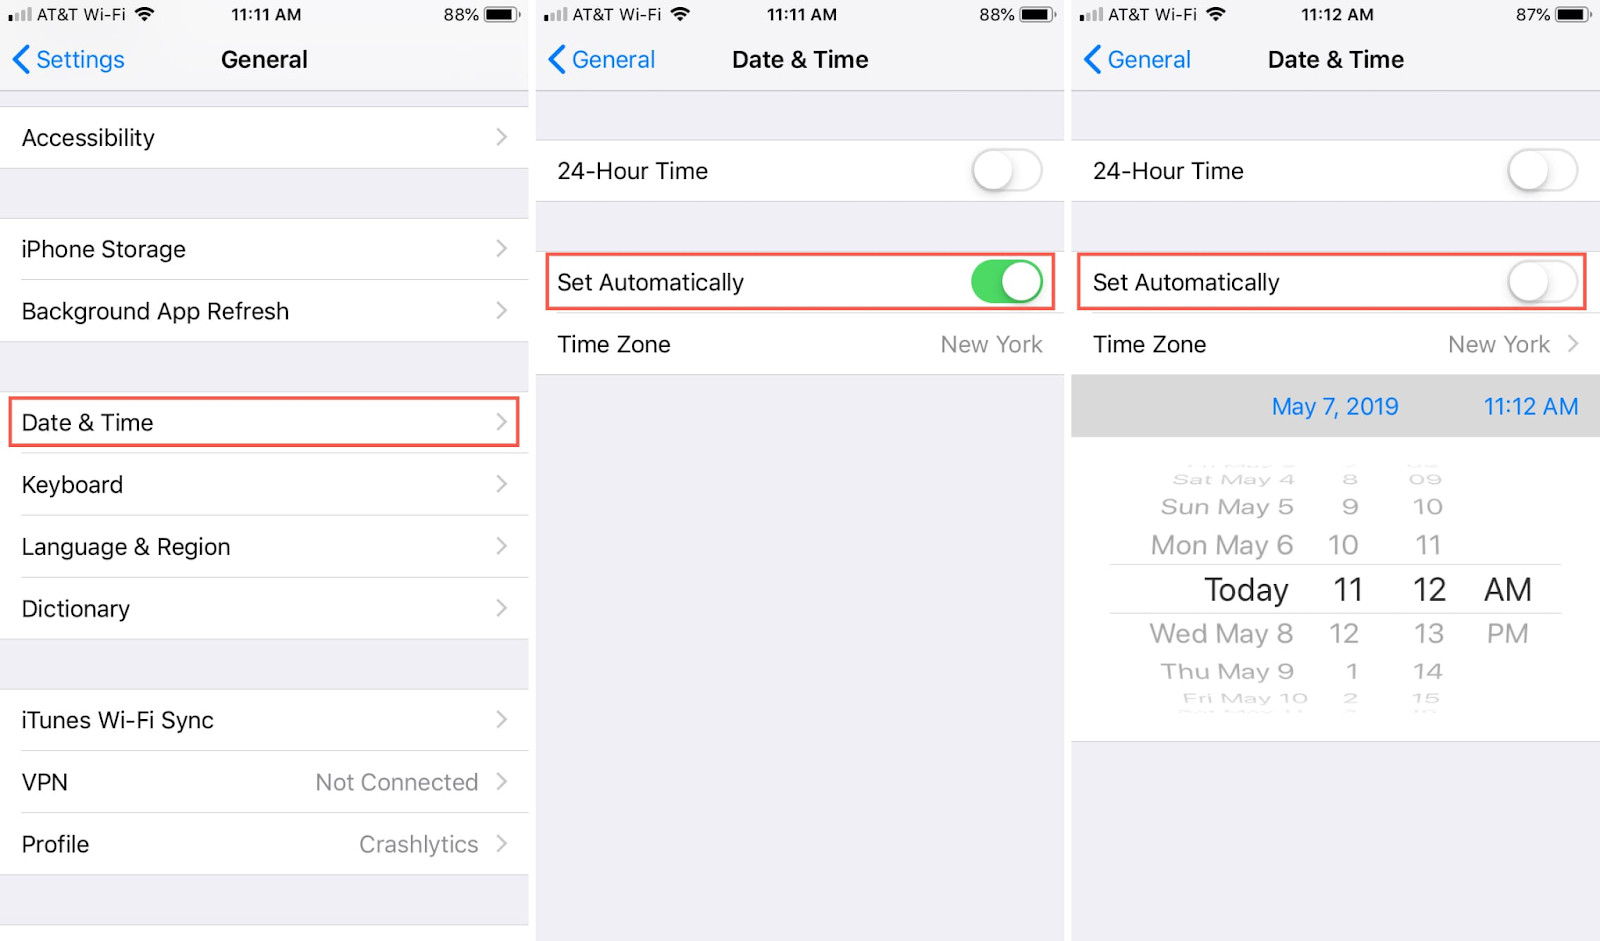 Reset Time Zone And Set Date & Time Automatically